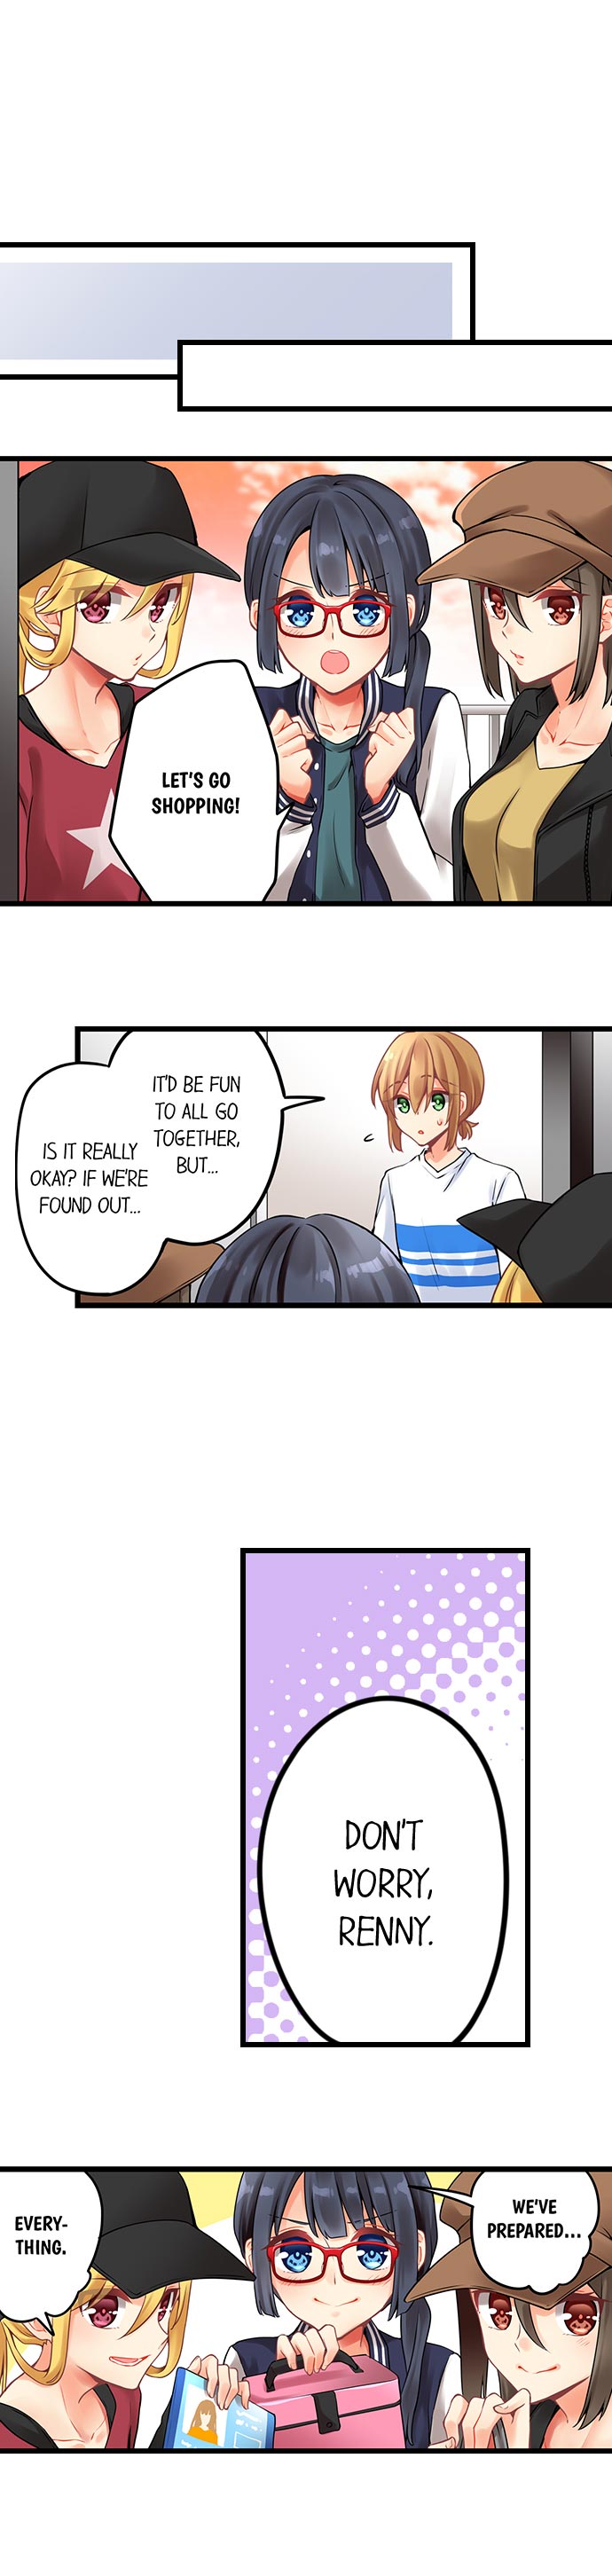 Ren Arisugawa Is Actually A Girl - Chapter 154 Page 3